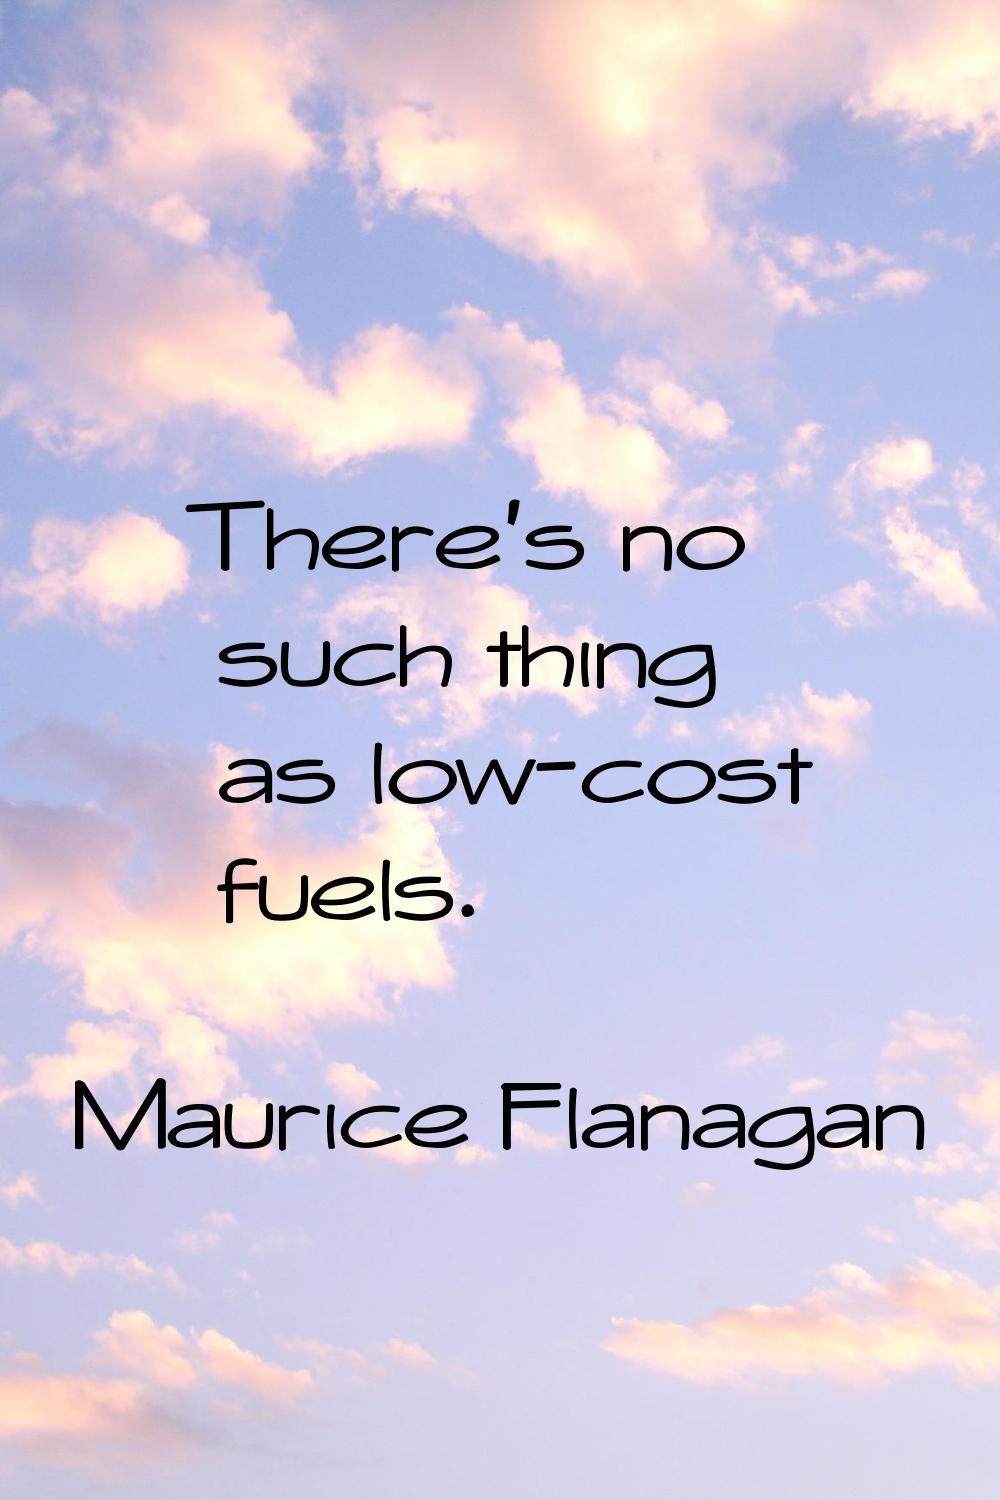 There's no such thing as low-cost fuels.